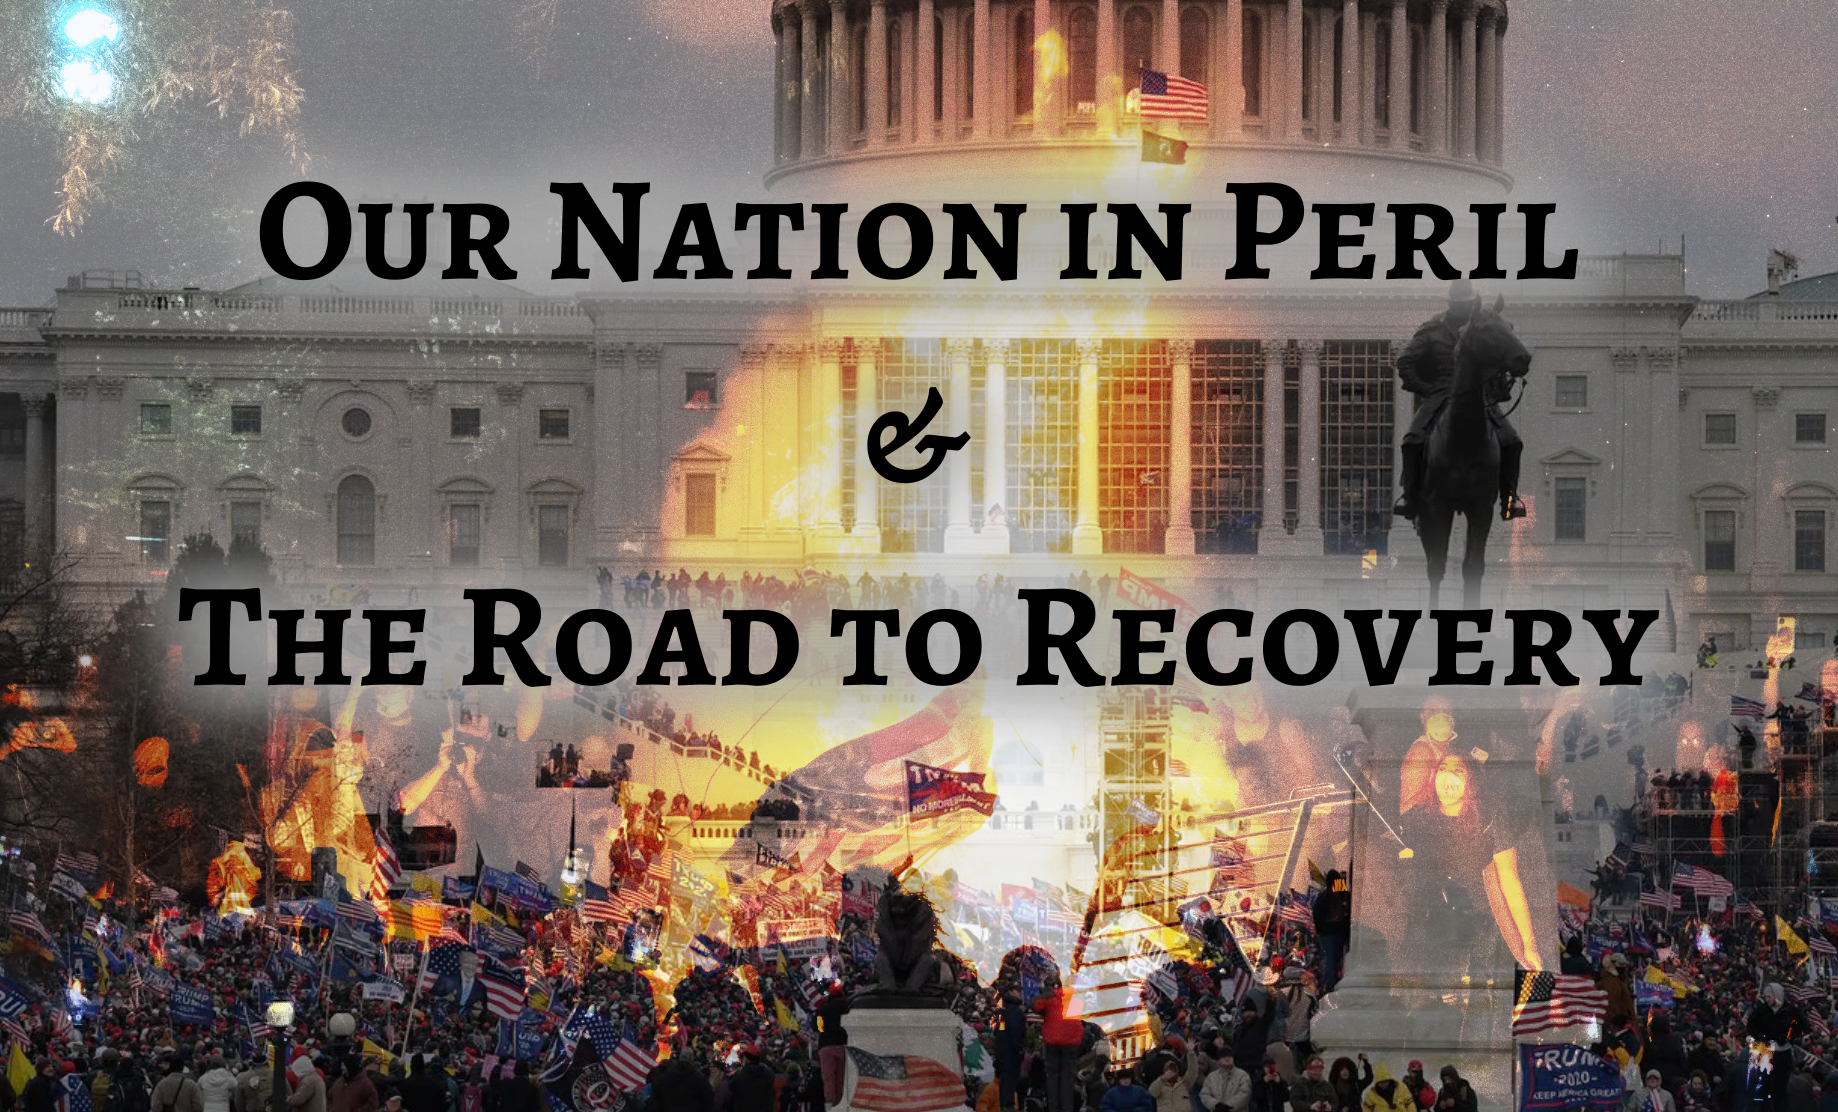 Our Nation in Peril and The road to recovery cover